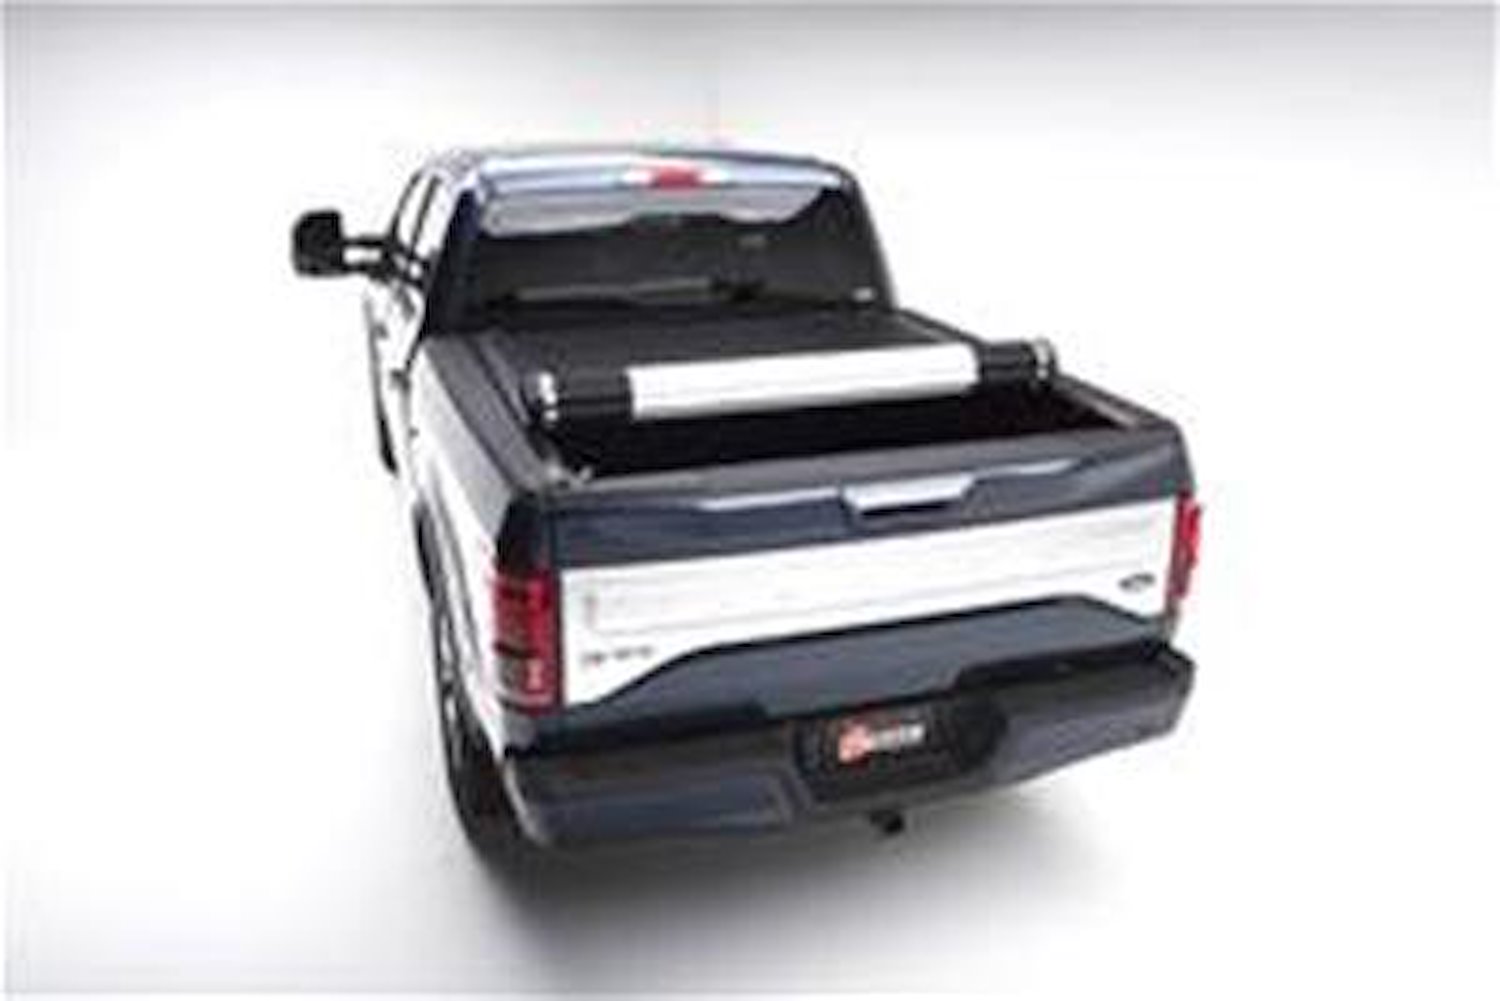 39333 Revolver X2 for Fits Select Ford Ranger 6.1 ft. Bed, Roll-Up Hard Cover Style [Black Finish]